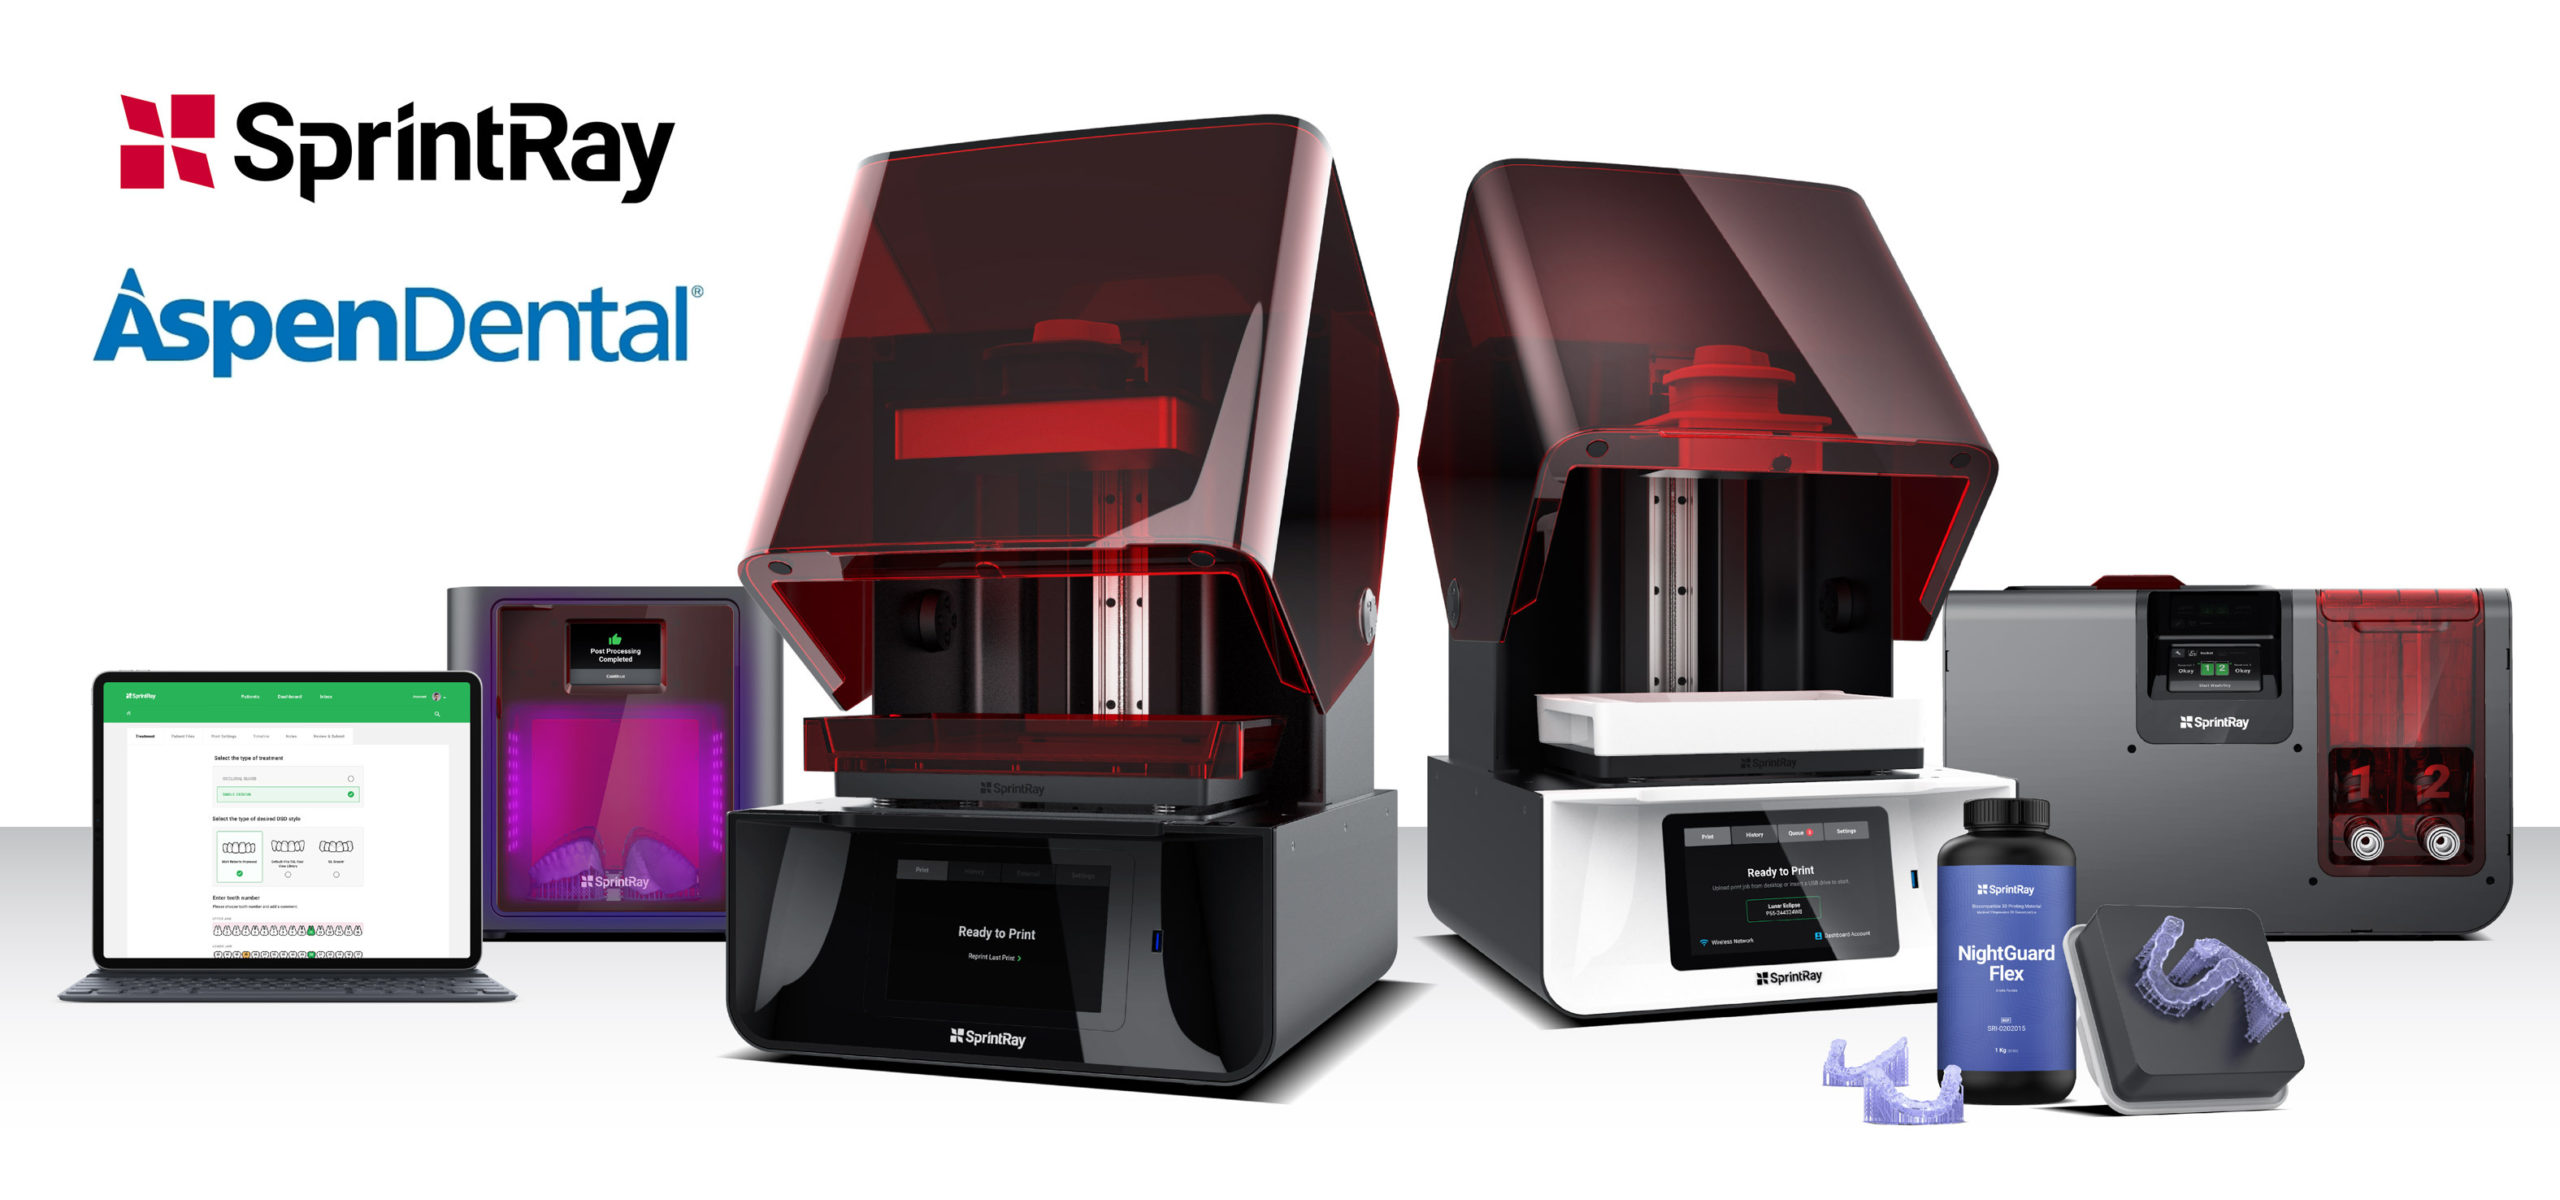 Professional 3D Printing Solutions for Digital Dentistry - SprintRay Inc.